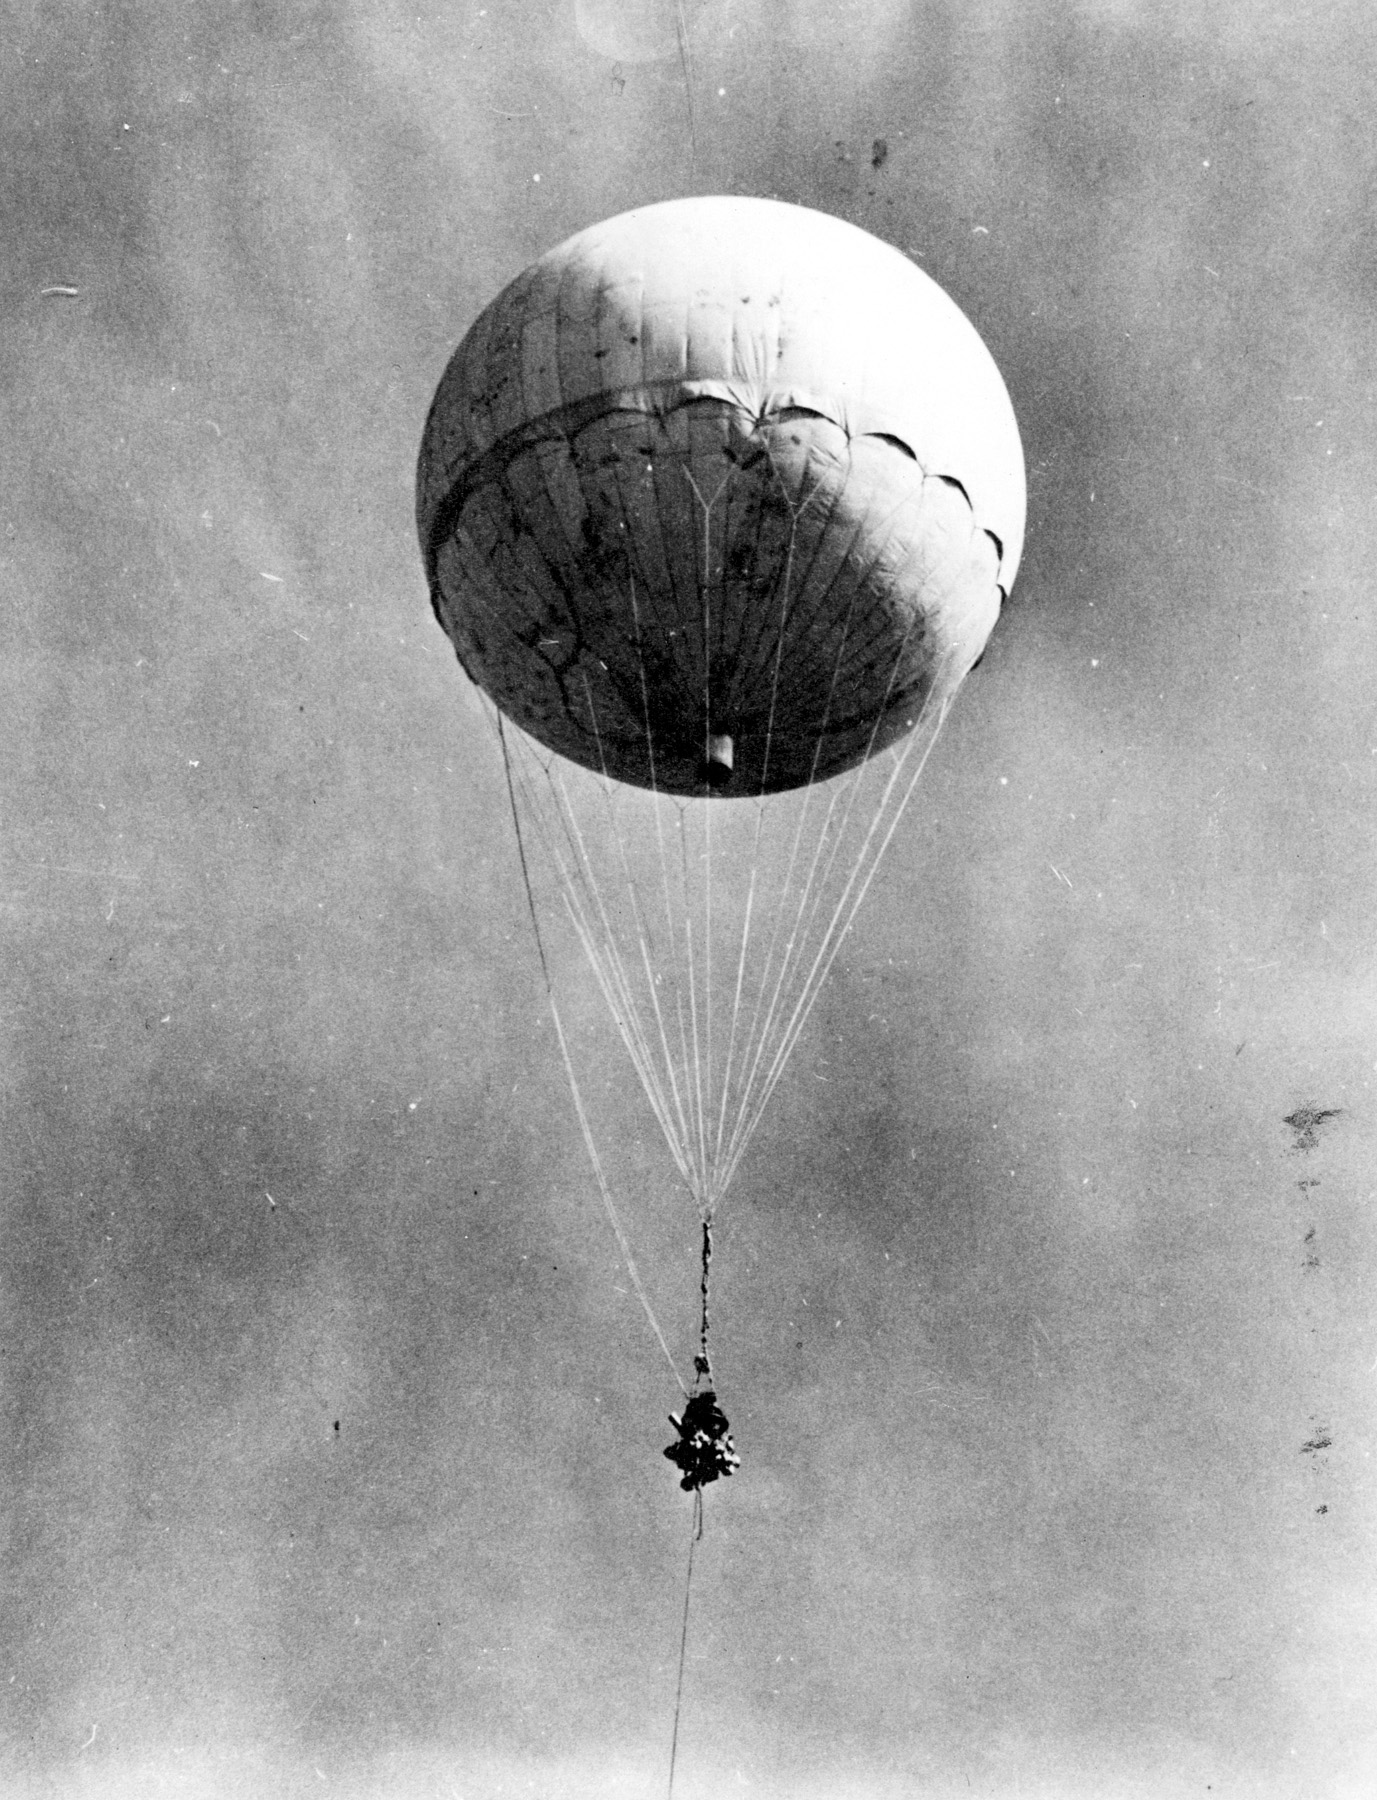 Japan employed 9,000 incendiary balloon bombs, known as fugo, in an attempt to bombard North America. Biological attacks on California were planned but never carried out. 